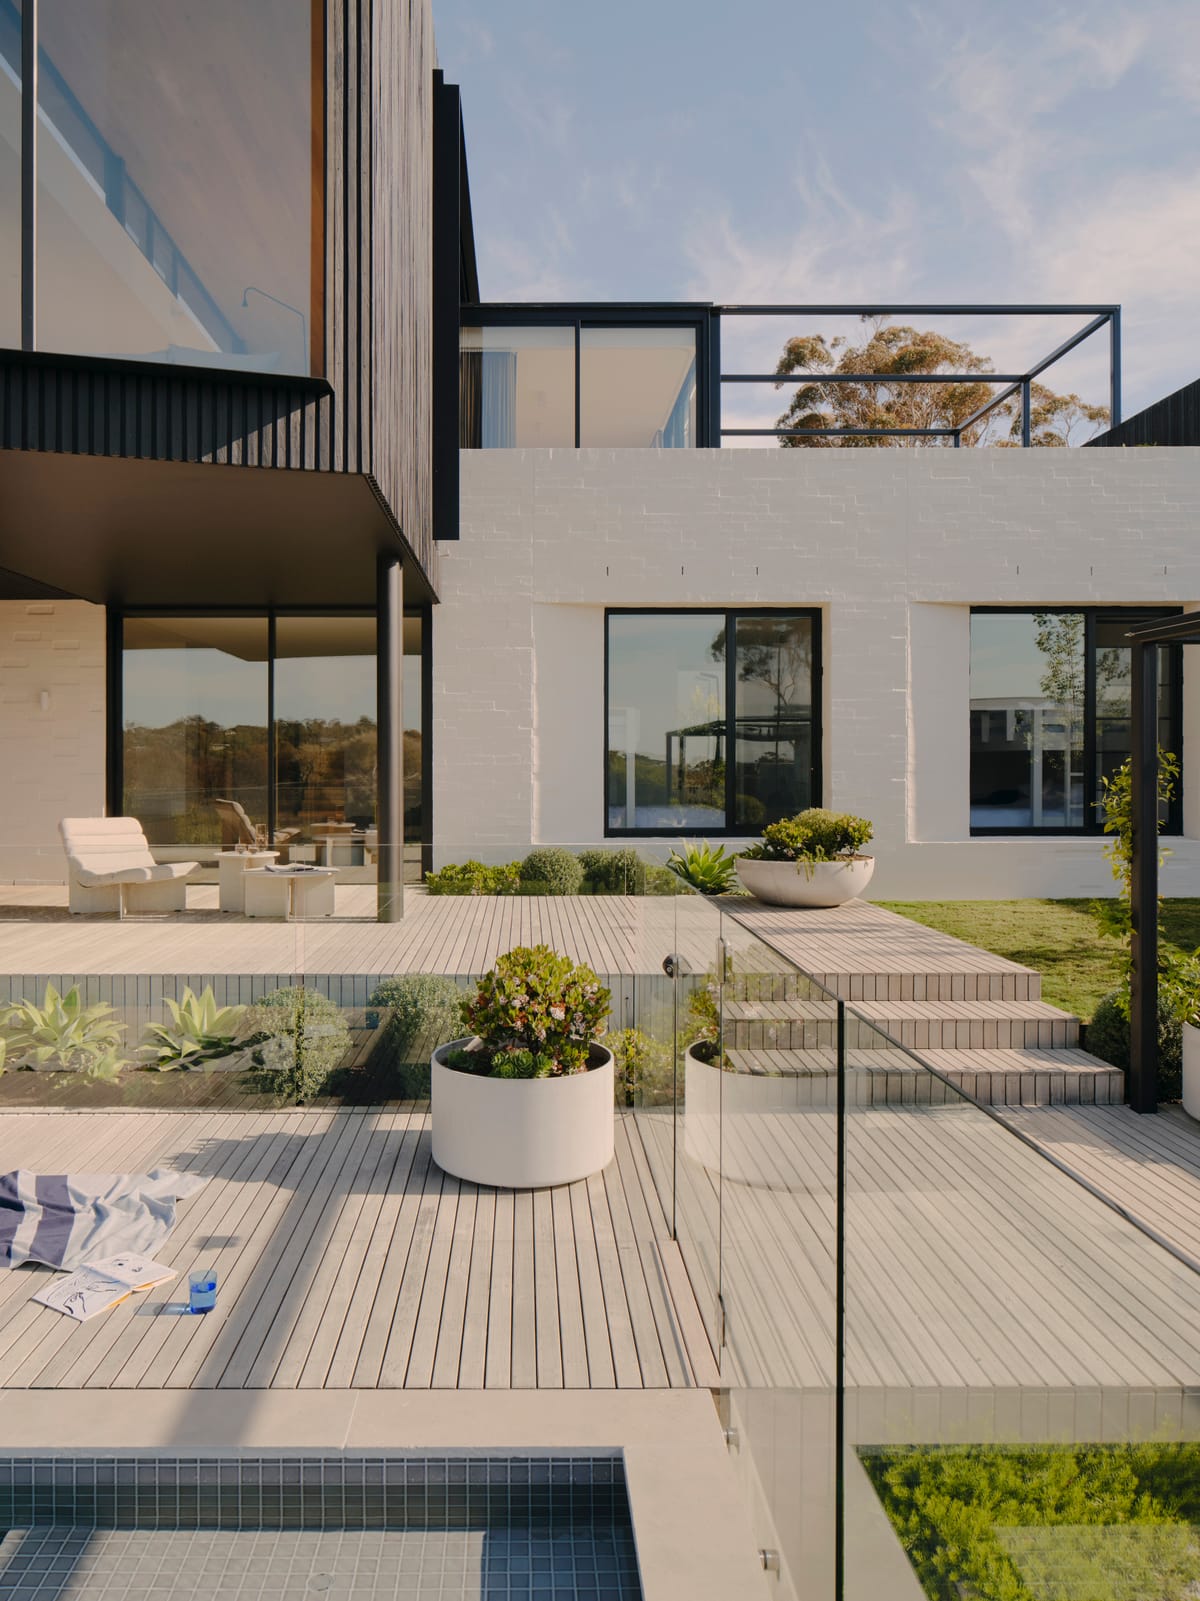 Courtside House by Tom Robertson Architects. Photography by Tom Ross. Exterior read facade of modern home